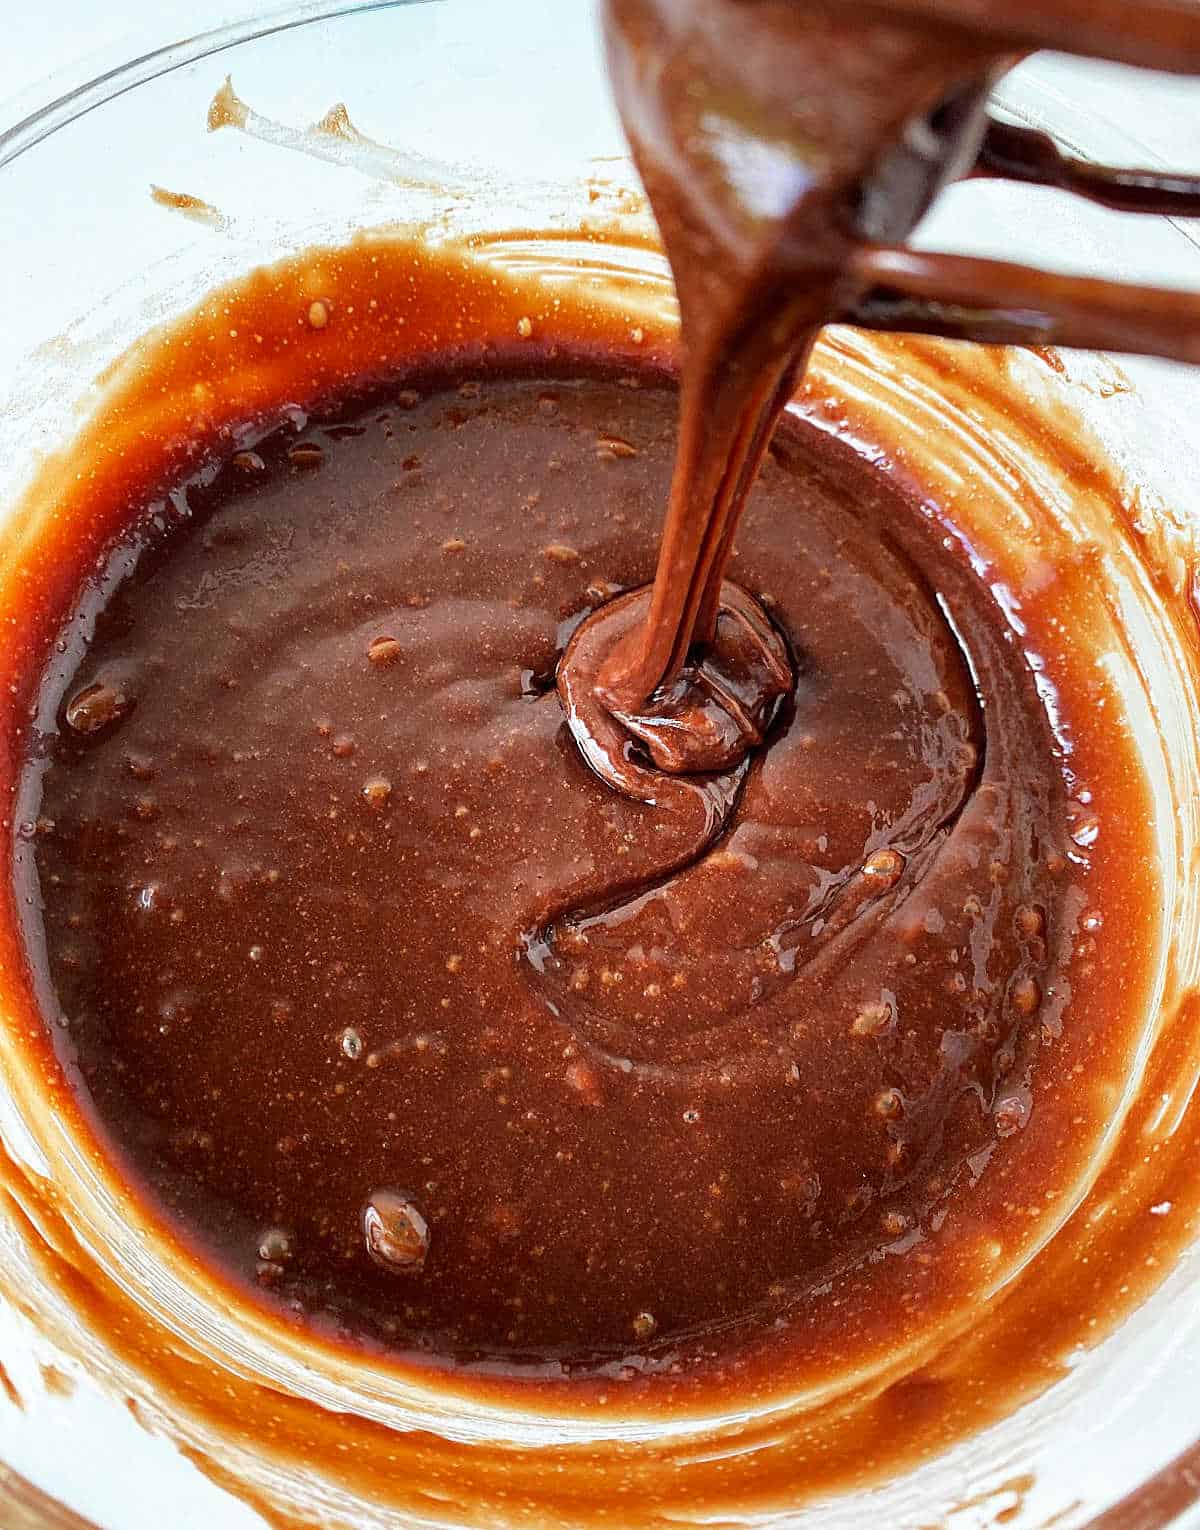 Chocolate brownie batter close-up on a glass bowl with a whisk.